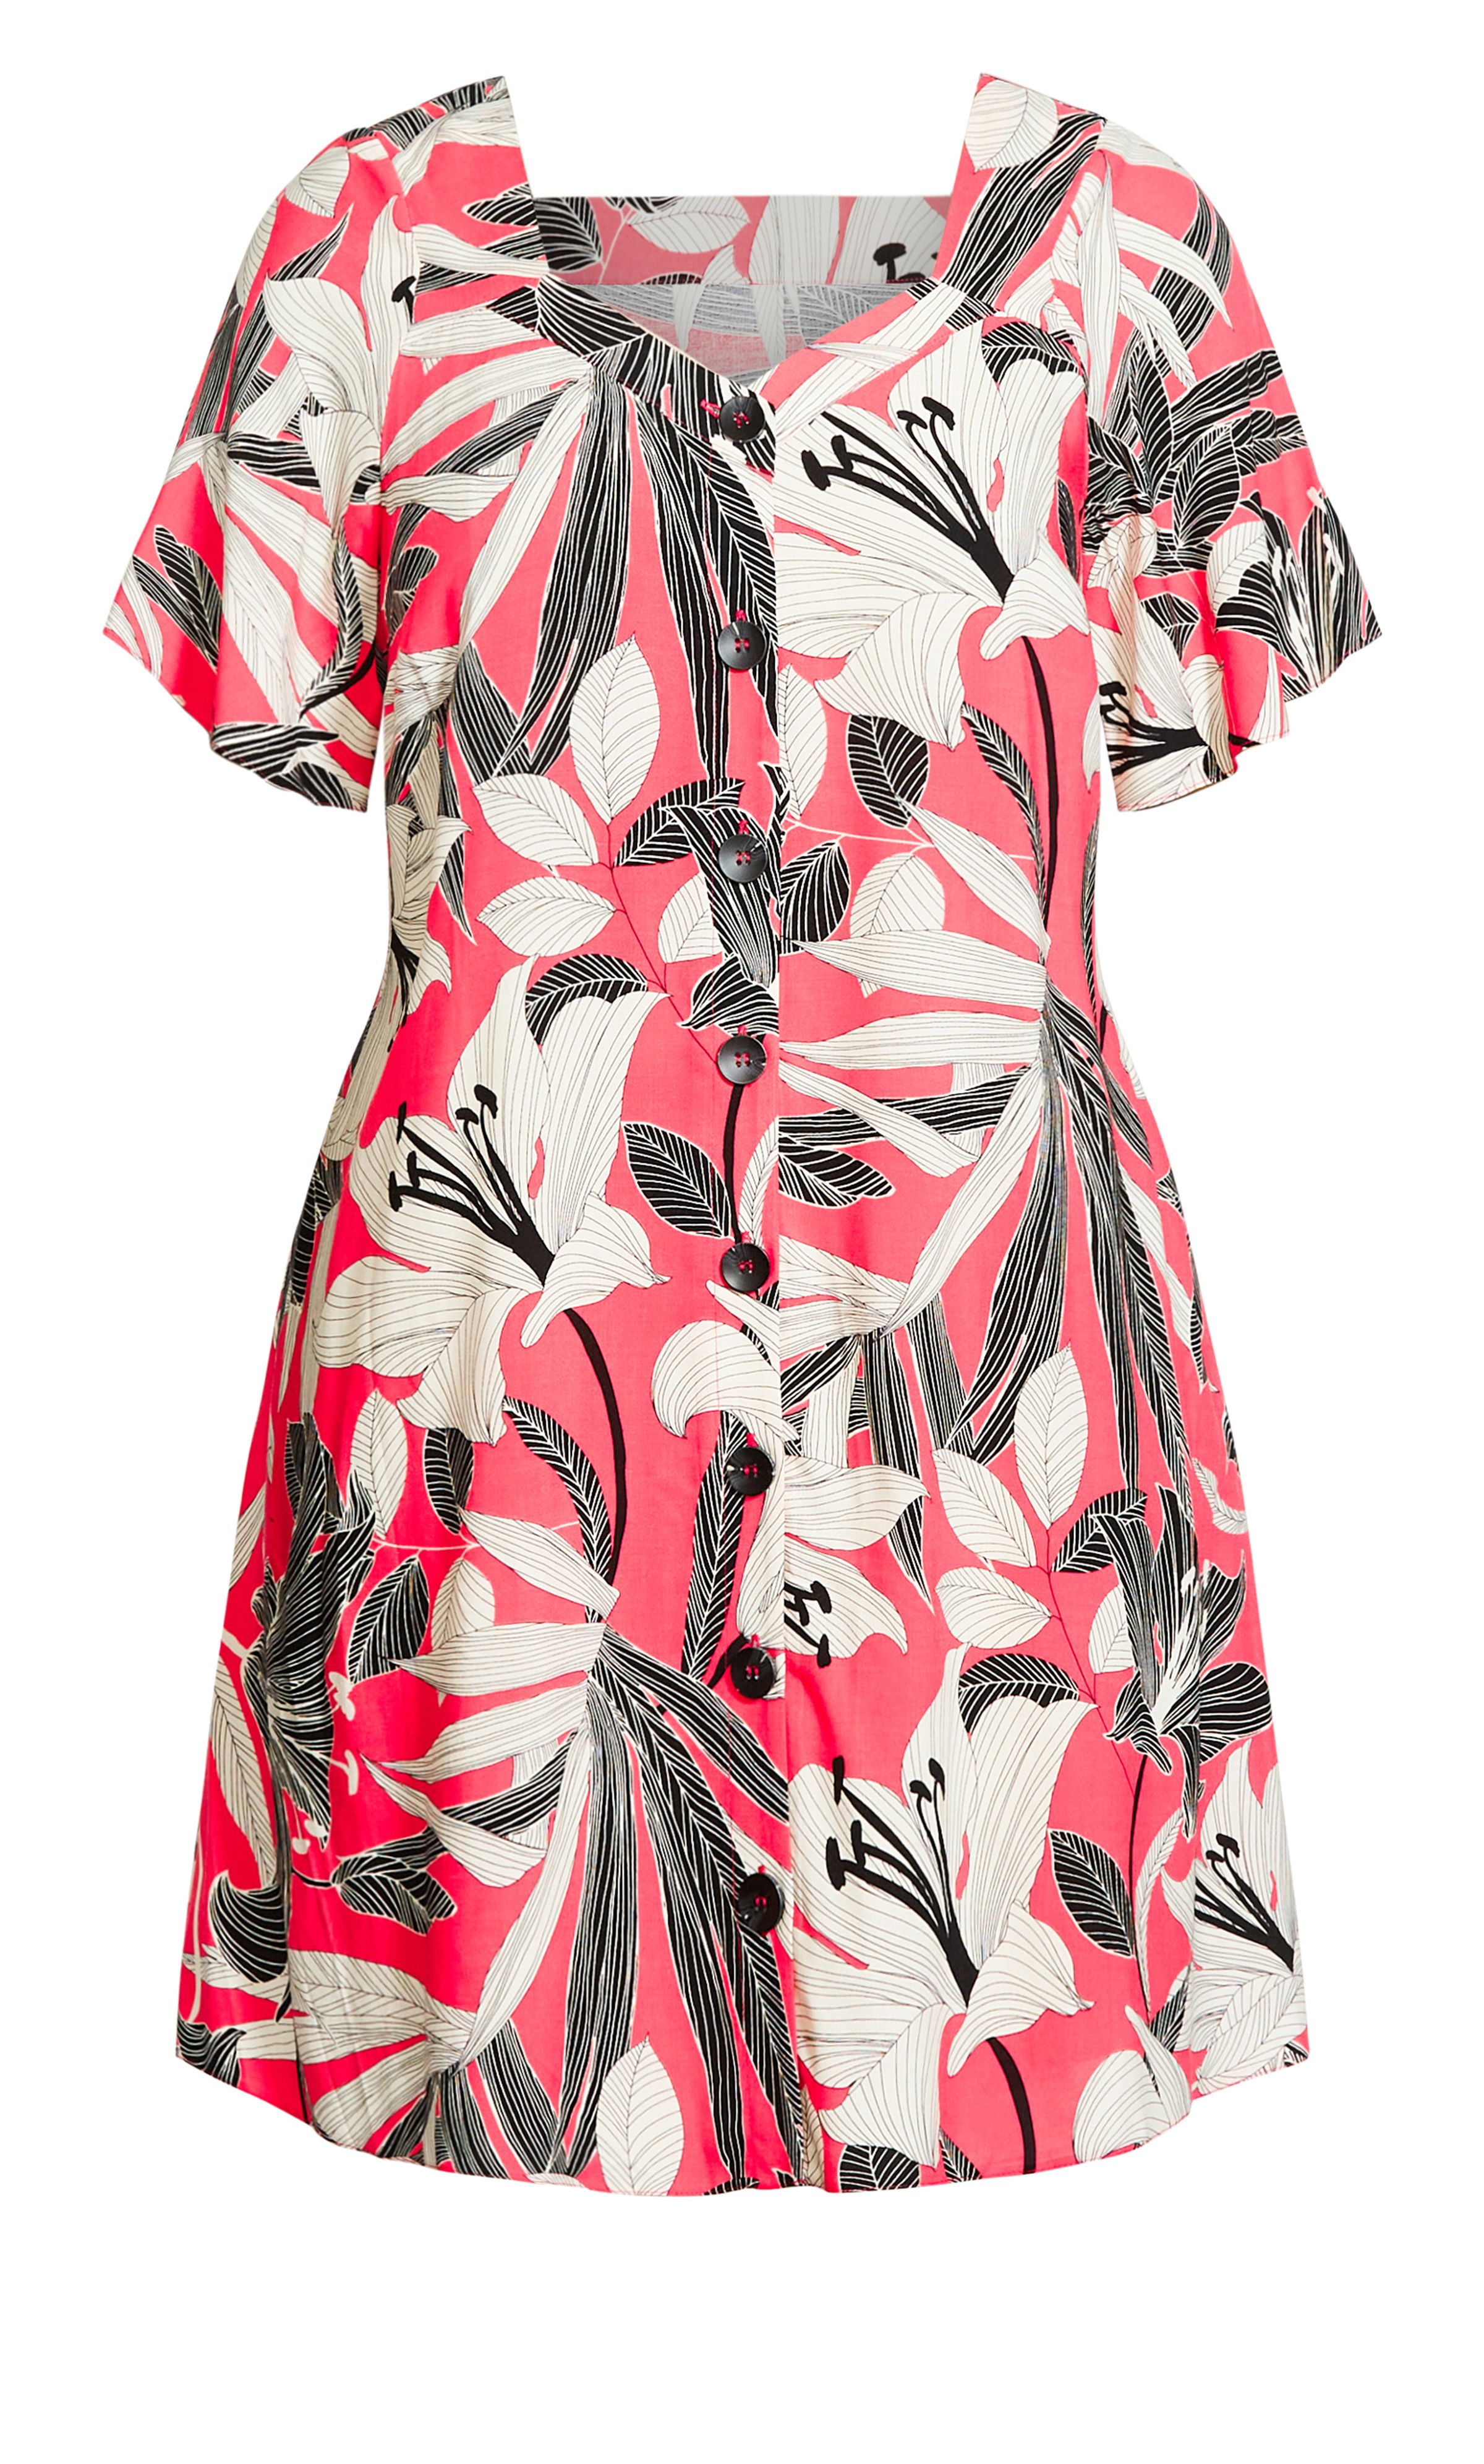 Keep pretty in pink this summer with our oh-so chic and playful Button Through Tropical Dress! Flirting with a tropical print and floaty relaxed fit, this flattering day dress ticks some serious style boxes. Key Features Include: - V-neckline - Short sleeves - Relaxed fit - Lightweight non-stretch fabrication - Workable buttoned front - Pull over style - Unlined - Hip length Keep it casual in fresh white trainers and a classic denim jacket.